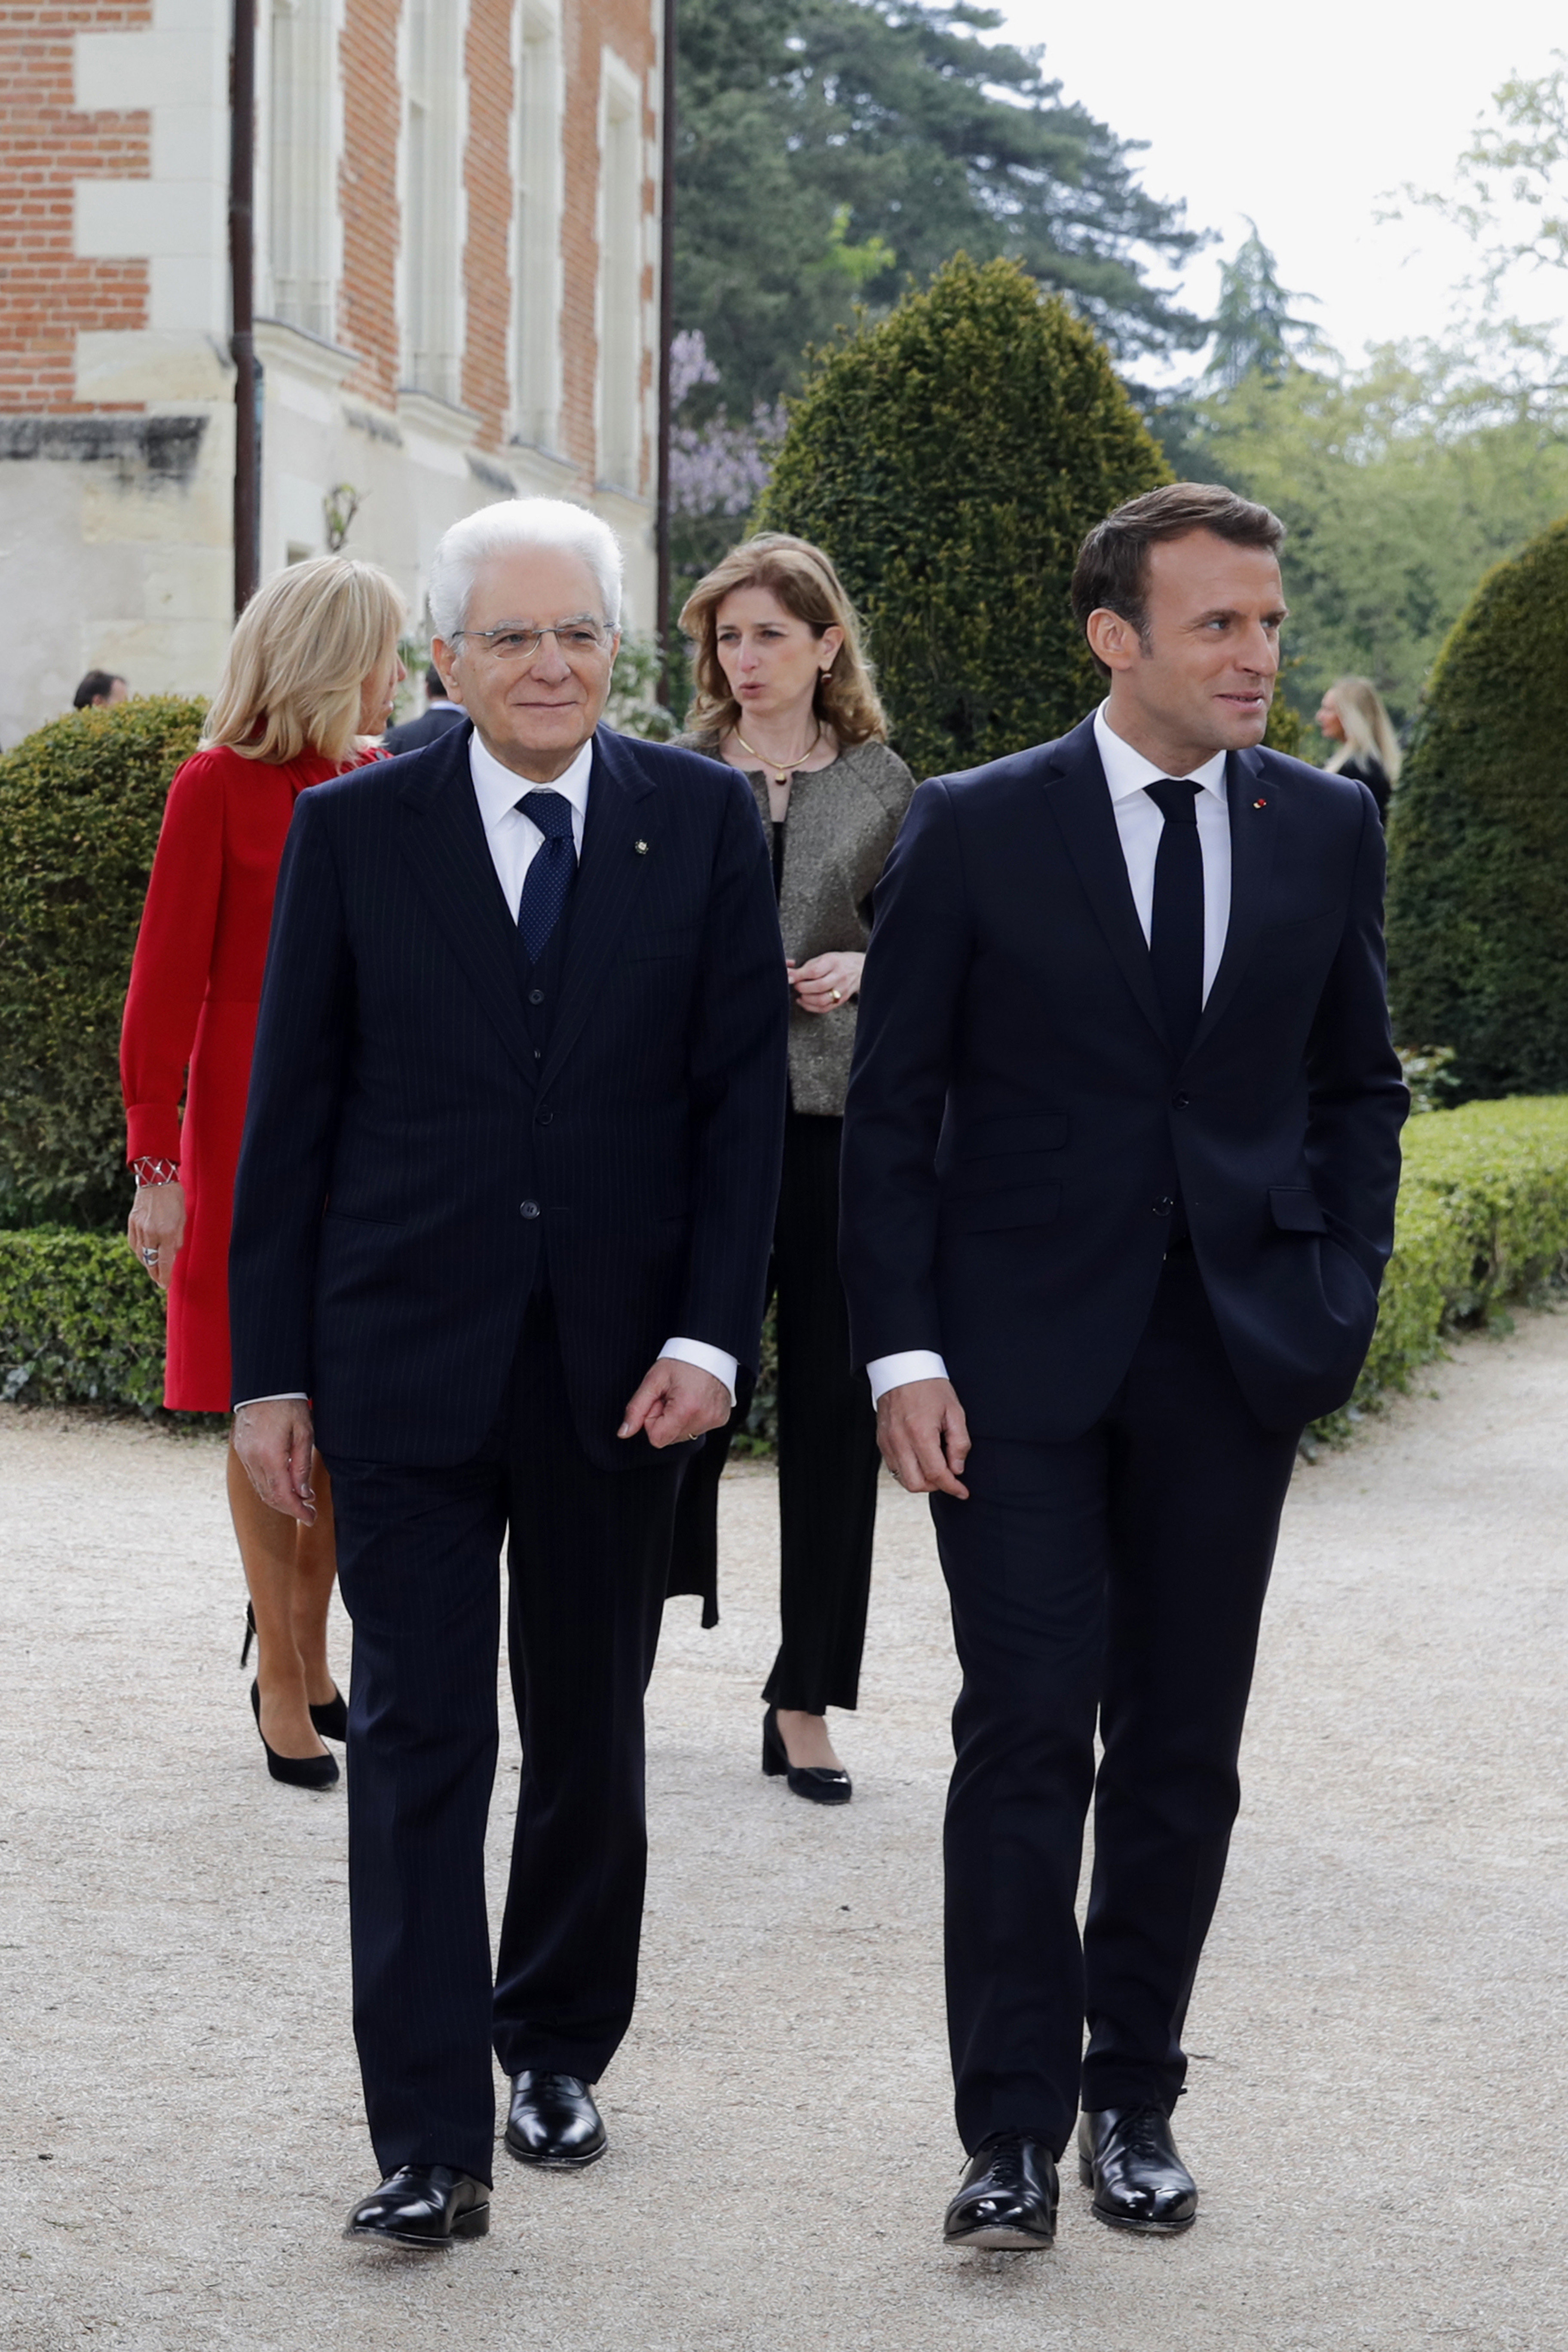 French President Emmanuel Macron, his wife Brigitte Macron, Italian President Sergio Mattarella and his daughter Laura Mattarella visit the Chateau du Clos Luce as part of a visit to commemorate the 500th anniversary of the death of Italian renaissance painter and scientist Leonardo da Vinci, in Amboise, south of Paris, France, Wednesday, May 2, 2019. (Philippe Wojazer, Pool via AP)